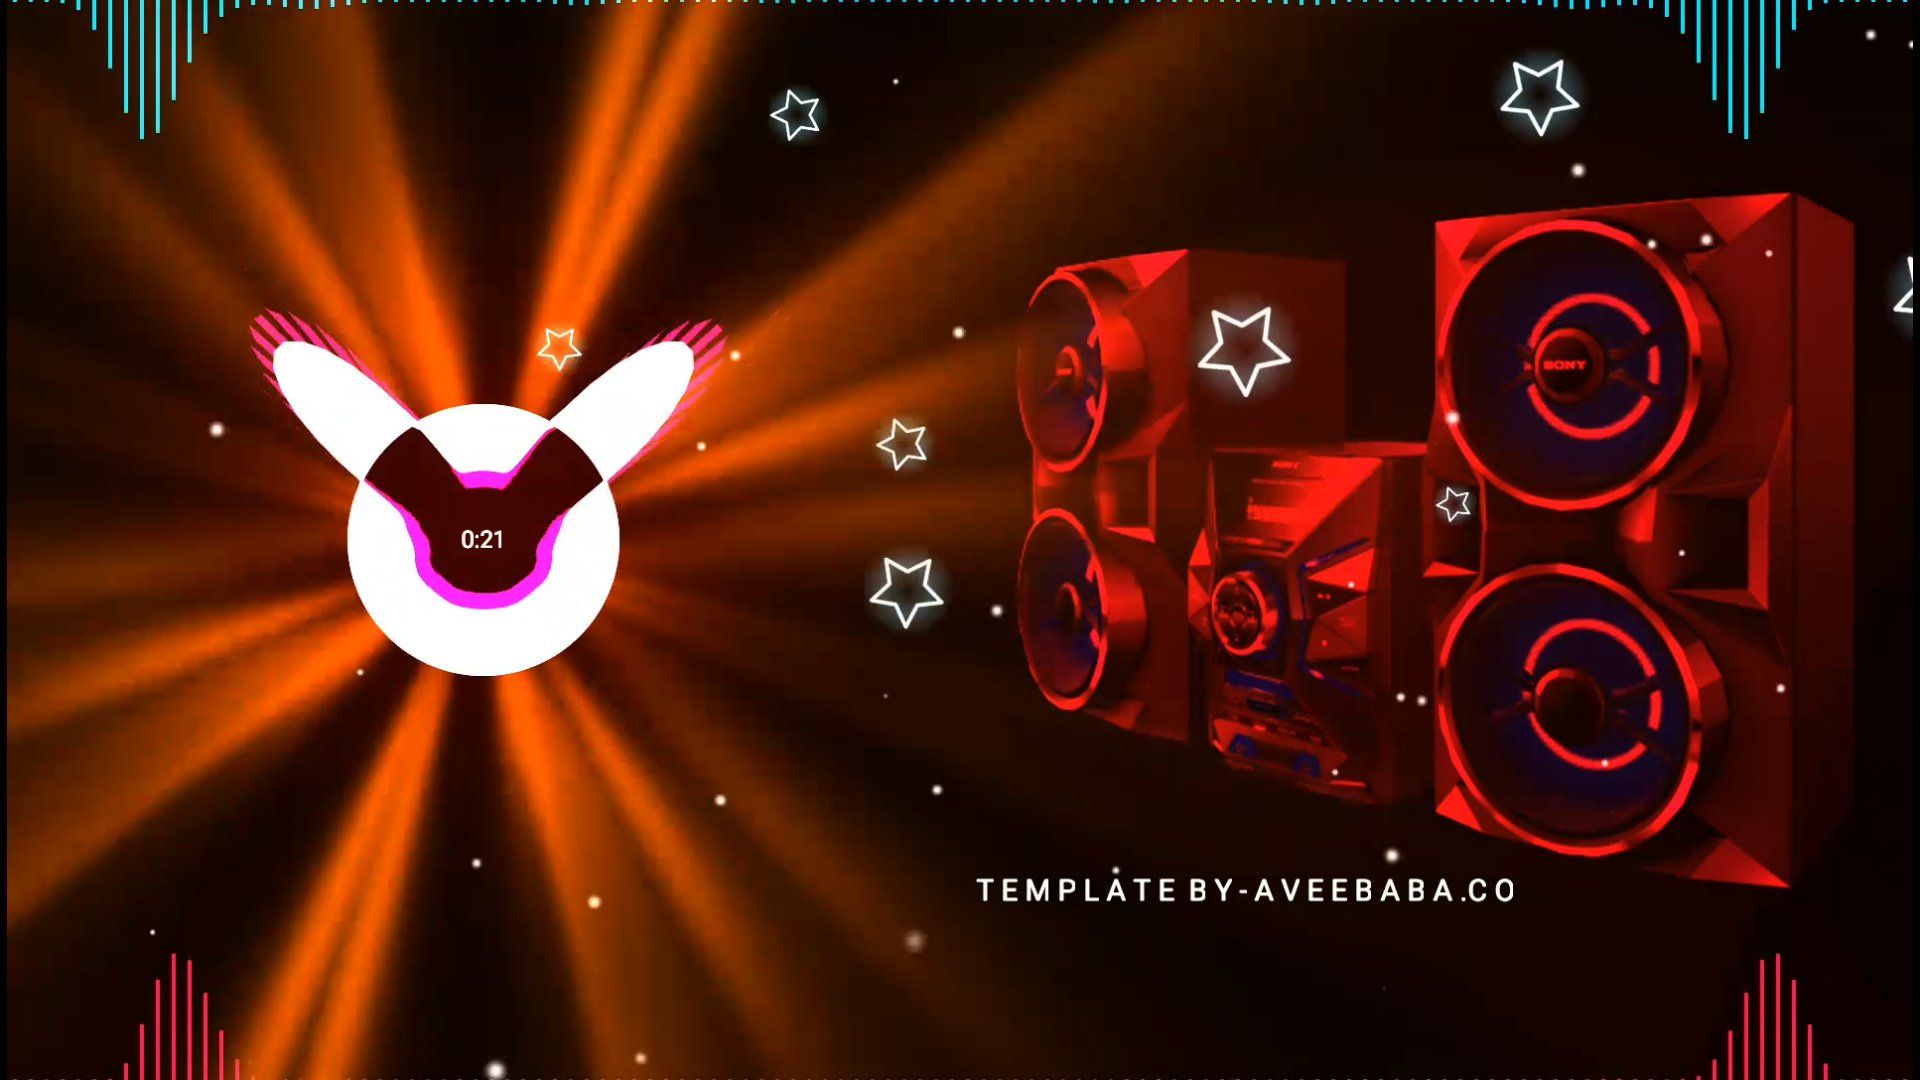 jbl-visualizer-for-avee-player-dj-template-download-free-2022-aveebaba-co